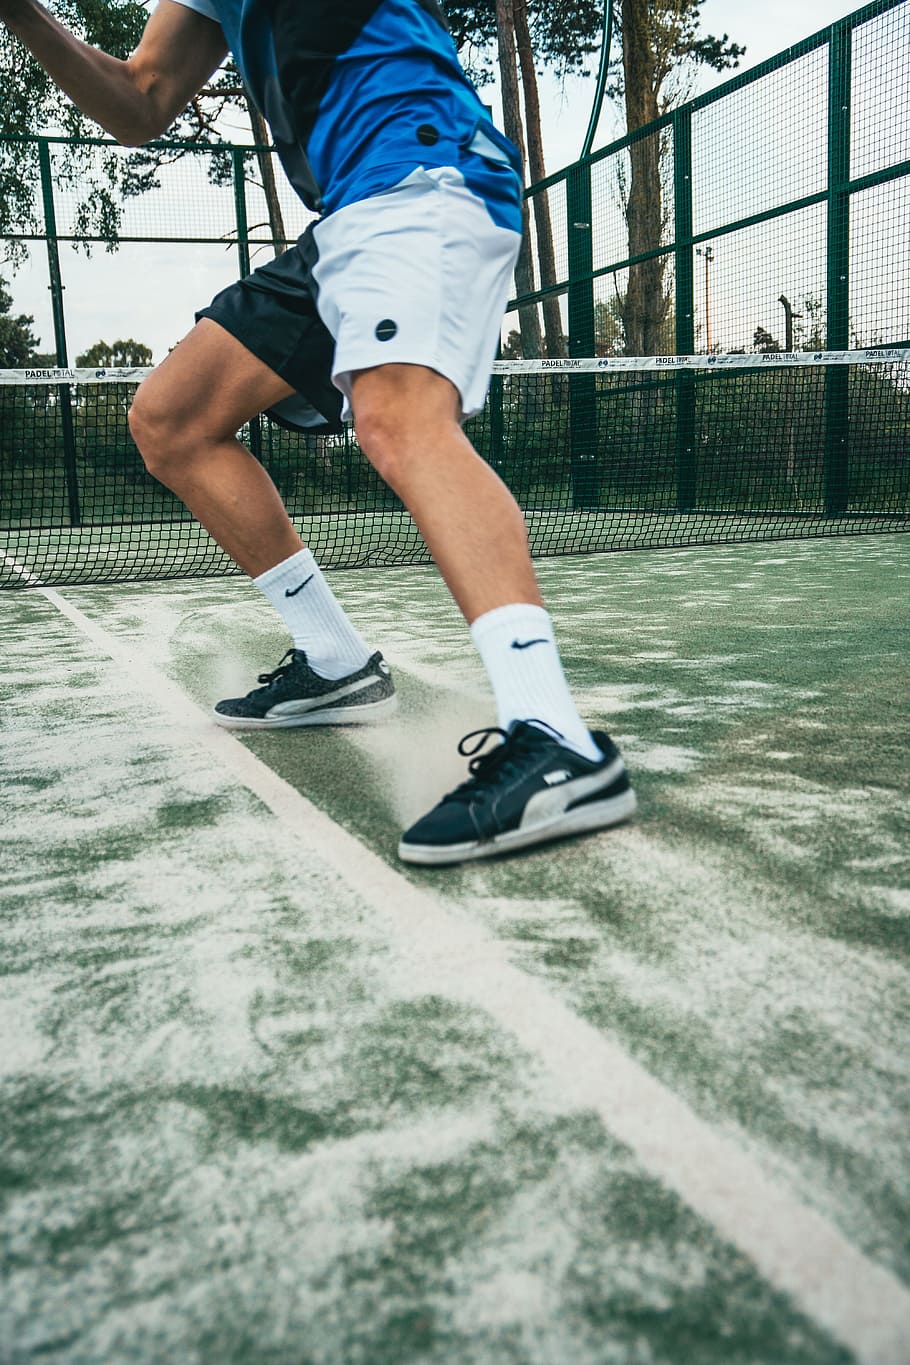 tennis, player, action, summer, court, green, trainers, sneakers, male, man